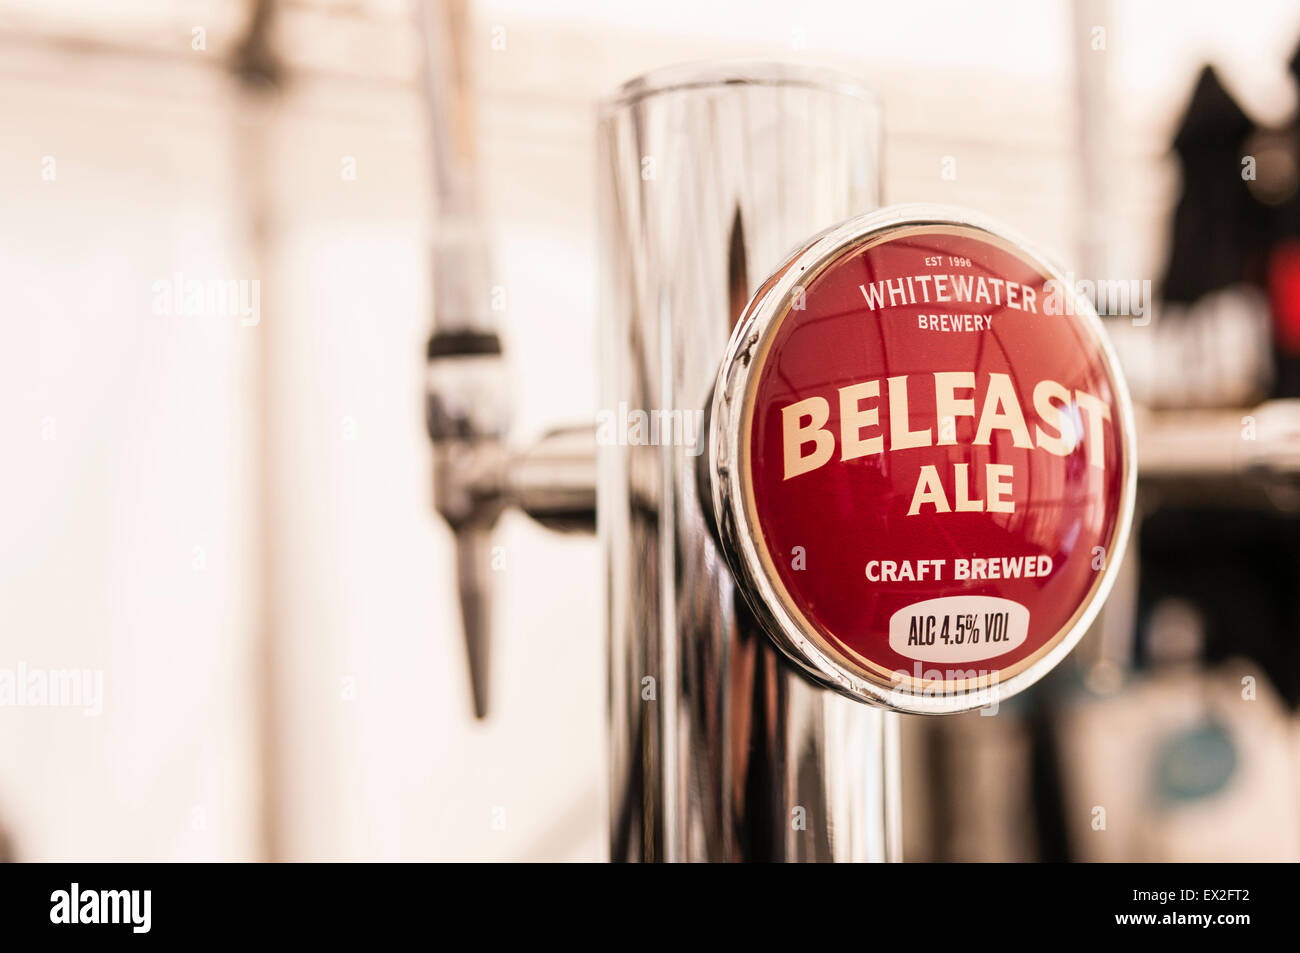 Beer pump dispensing Belfast Ale from the Whitewater Brewery Stock Photo